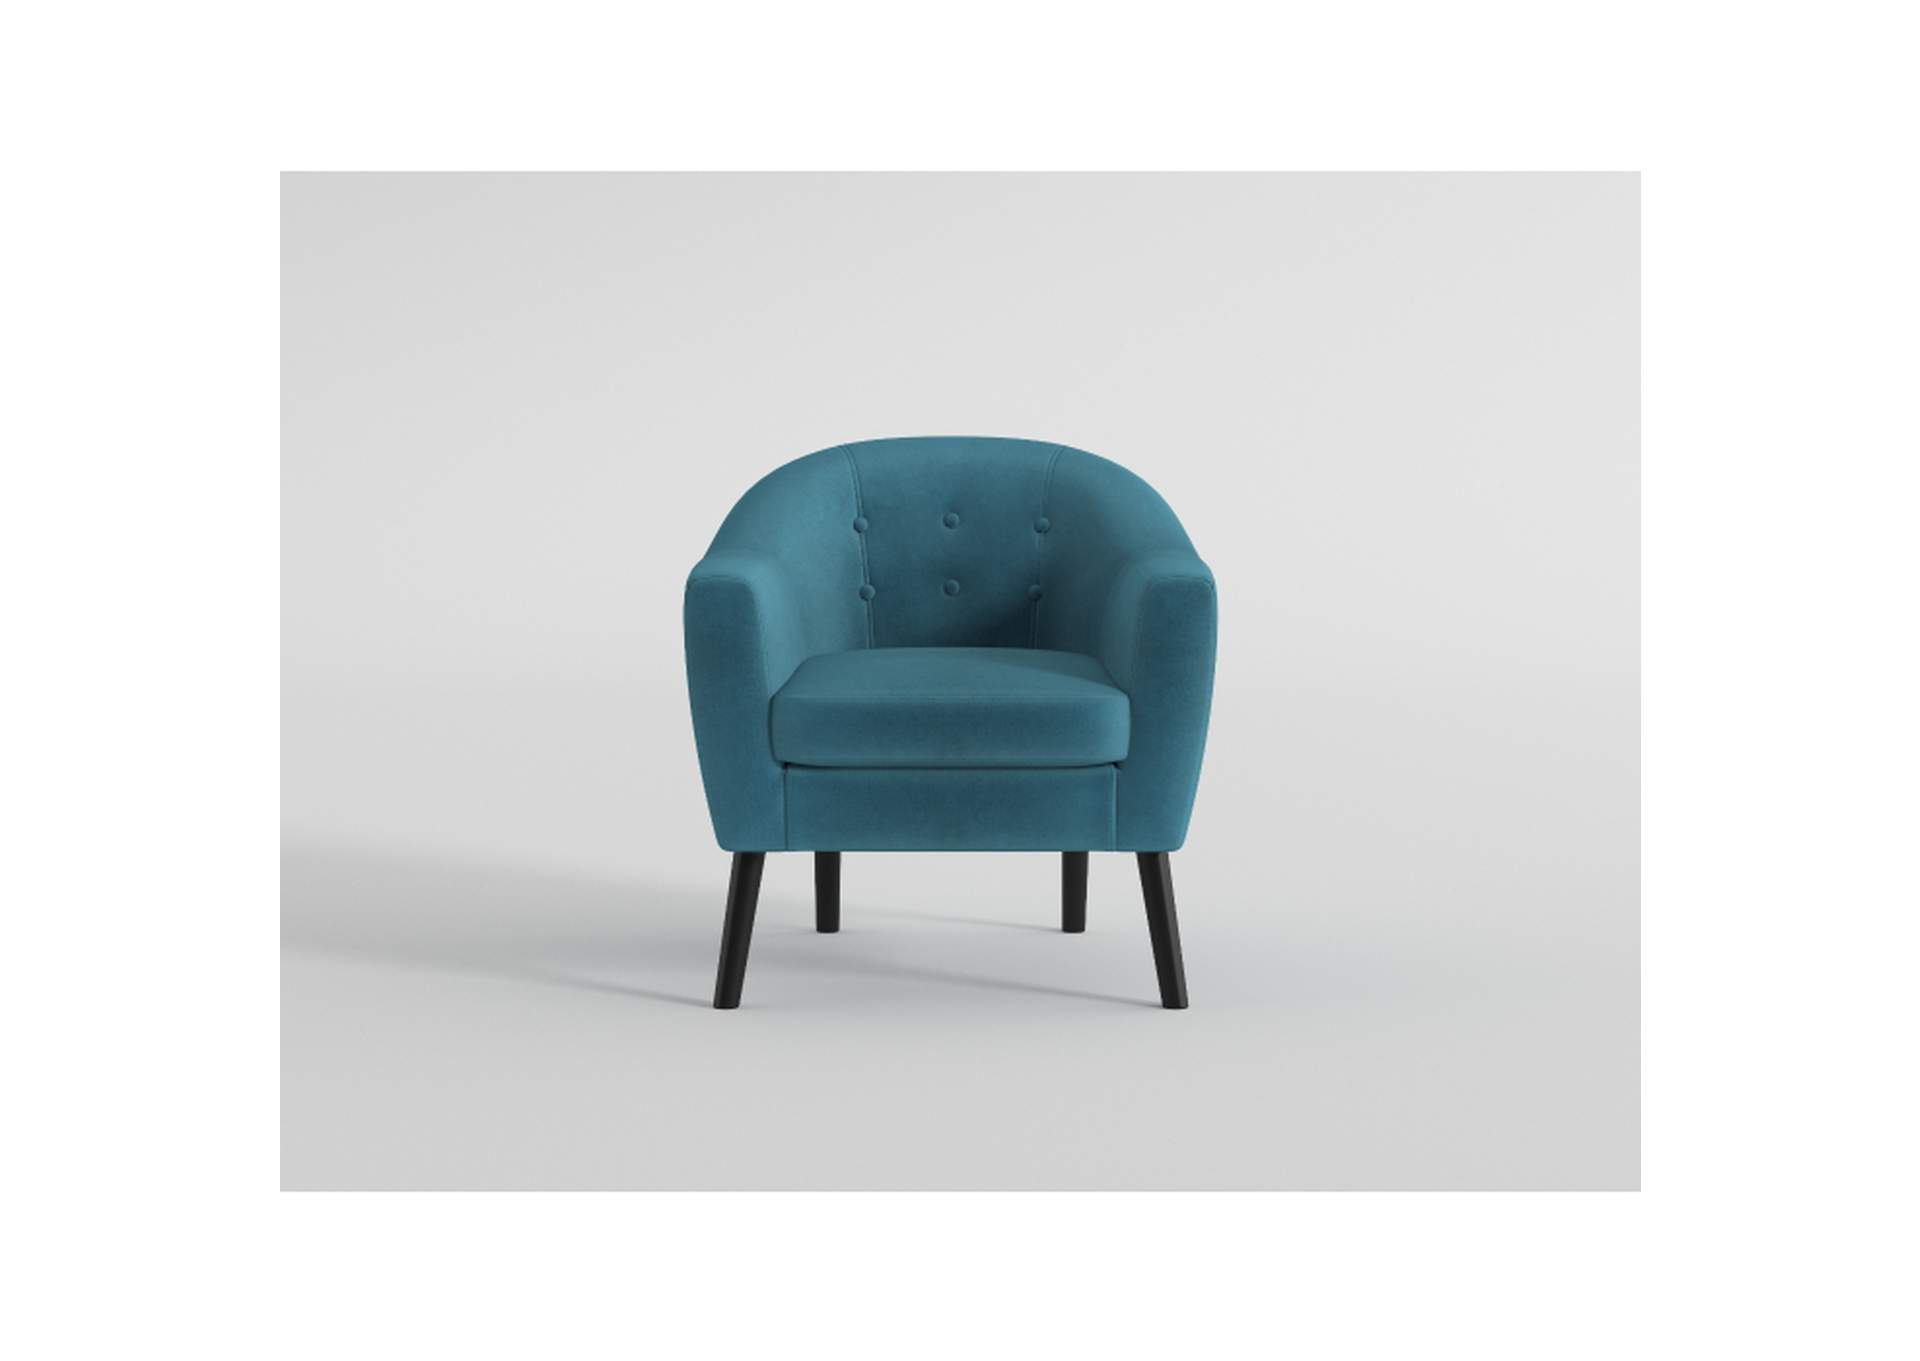 Quill Accent Chair,Homelegance